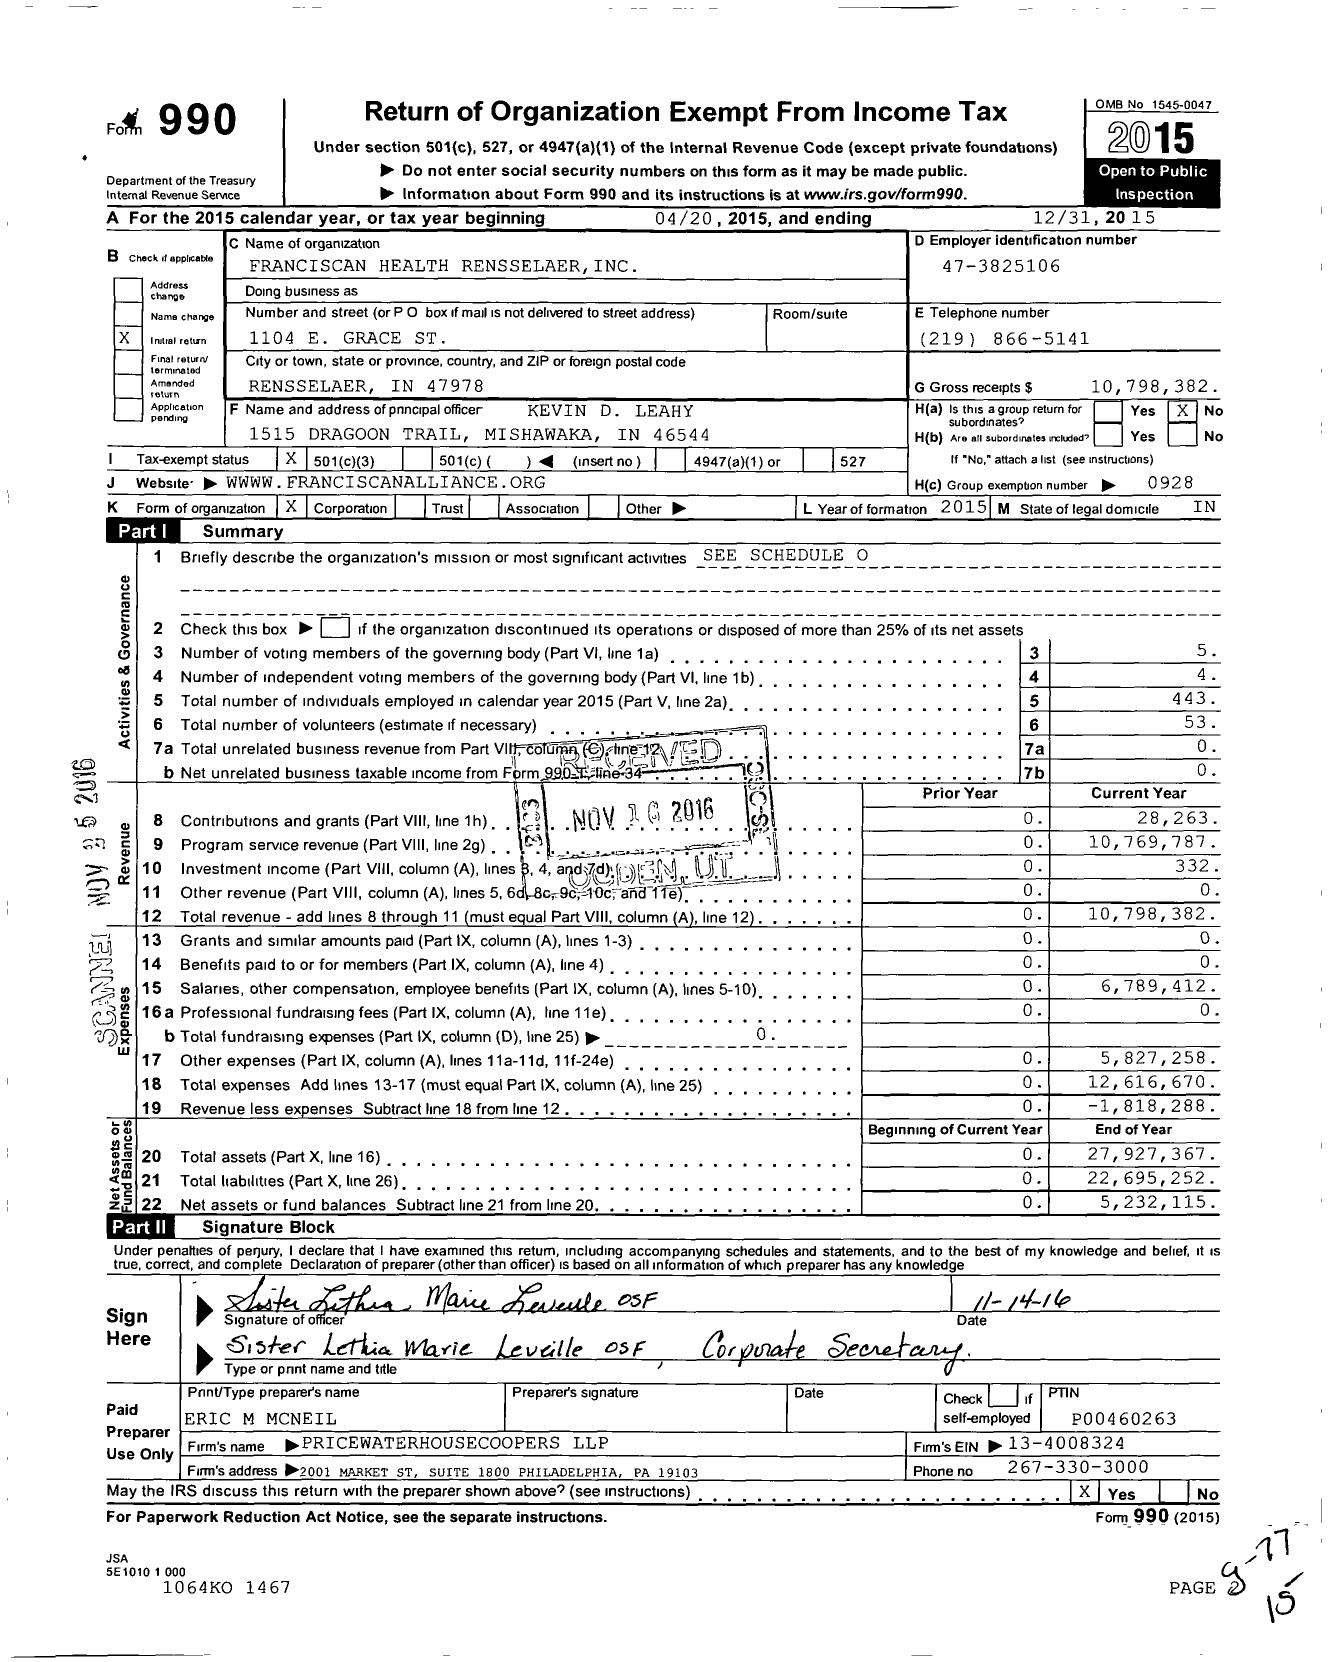 Image of first page of 2015 Form 990 for Franciscan Health Rensselaer